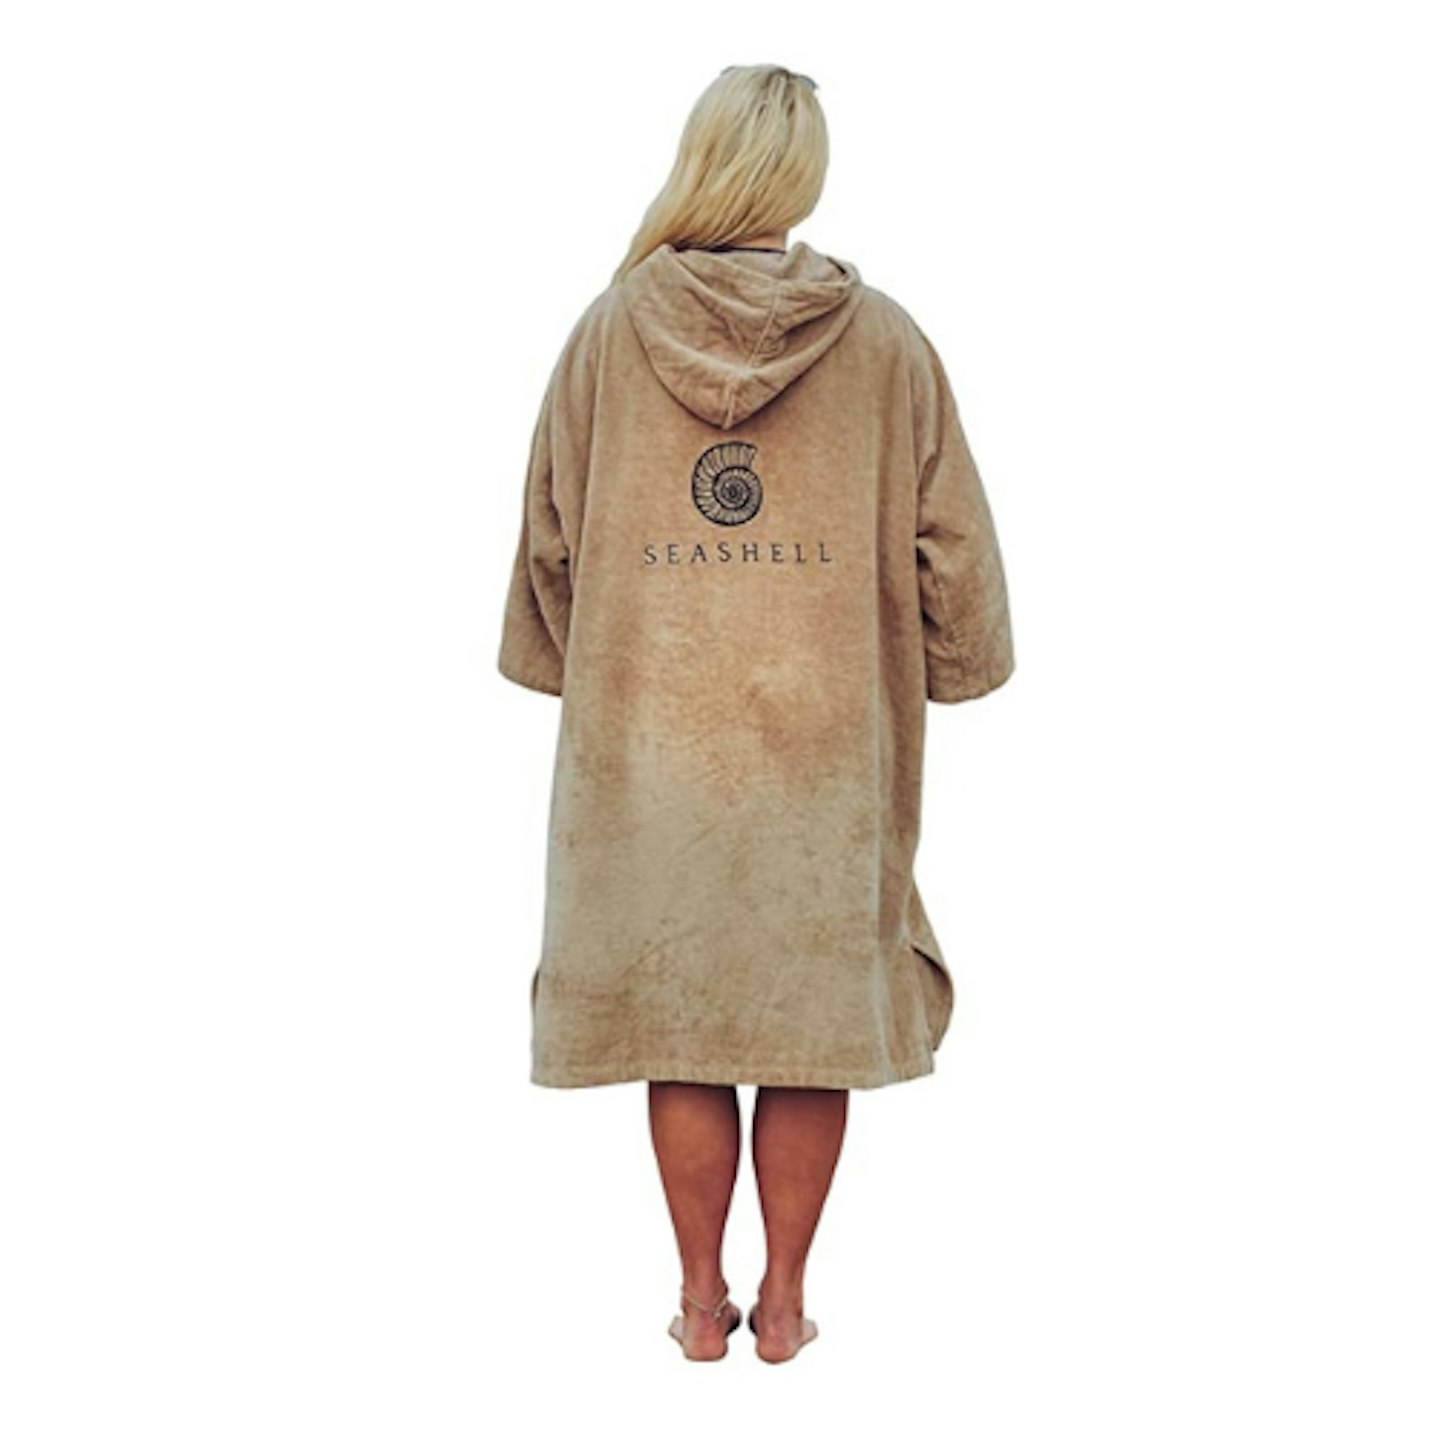 Seashell Dressing Gown